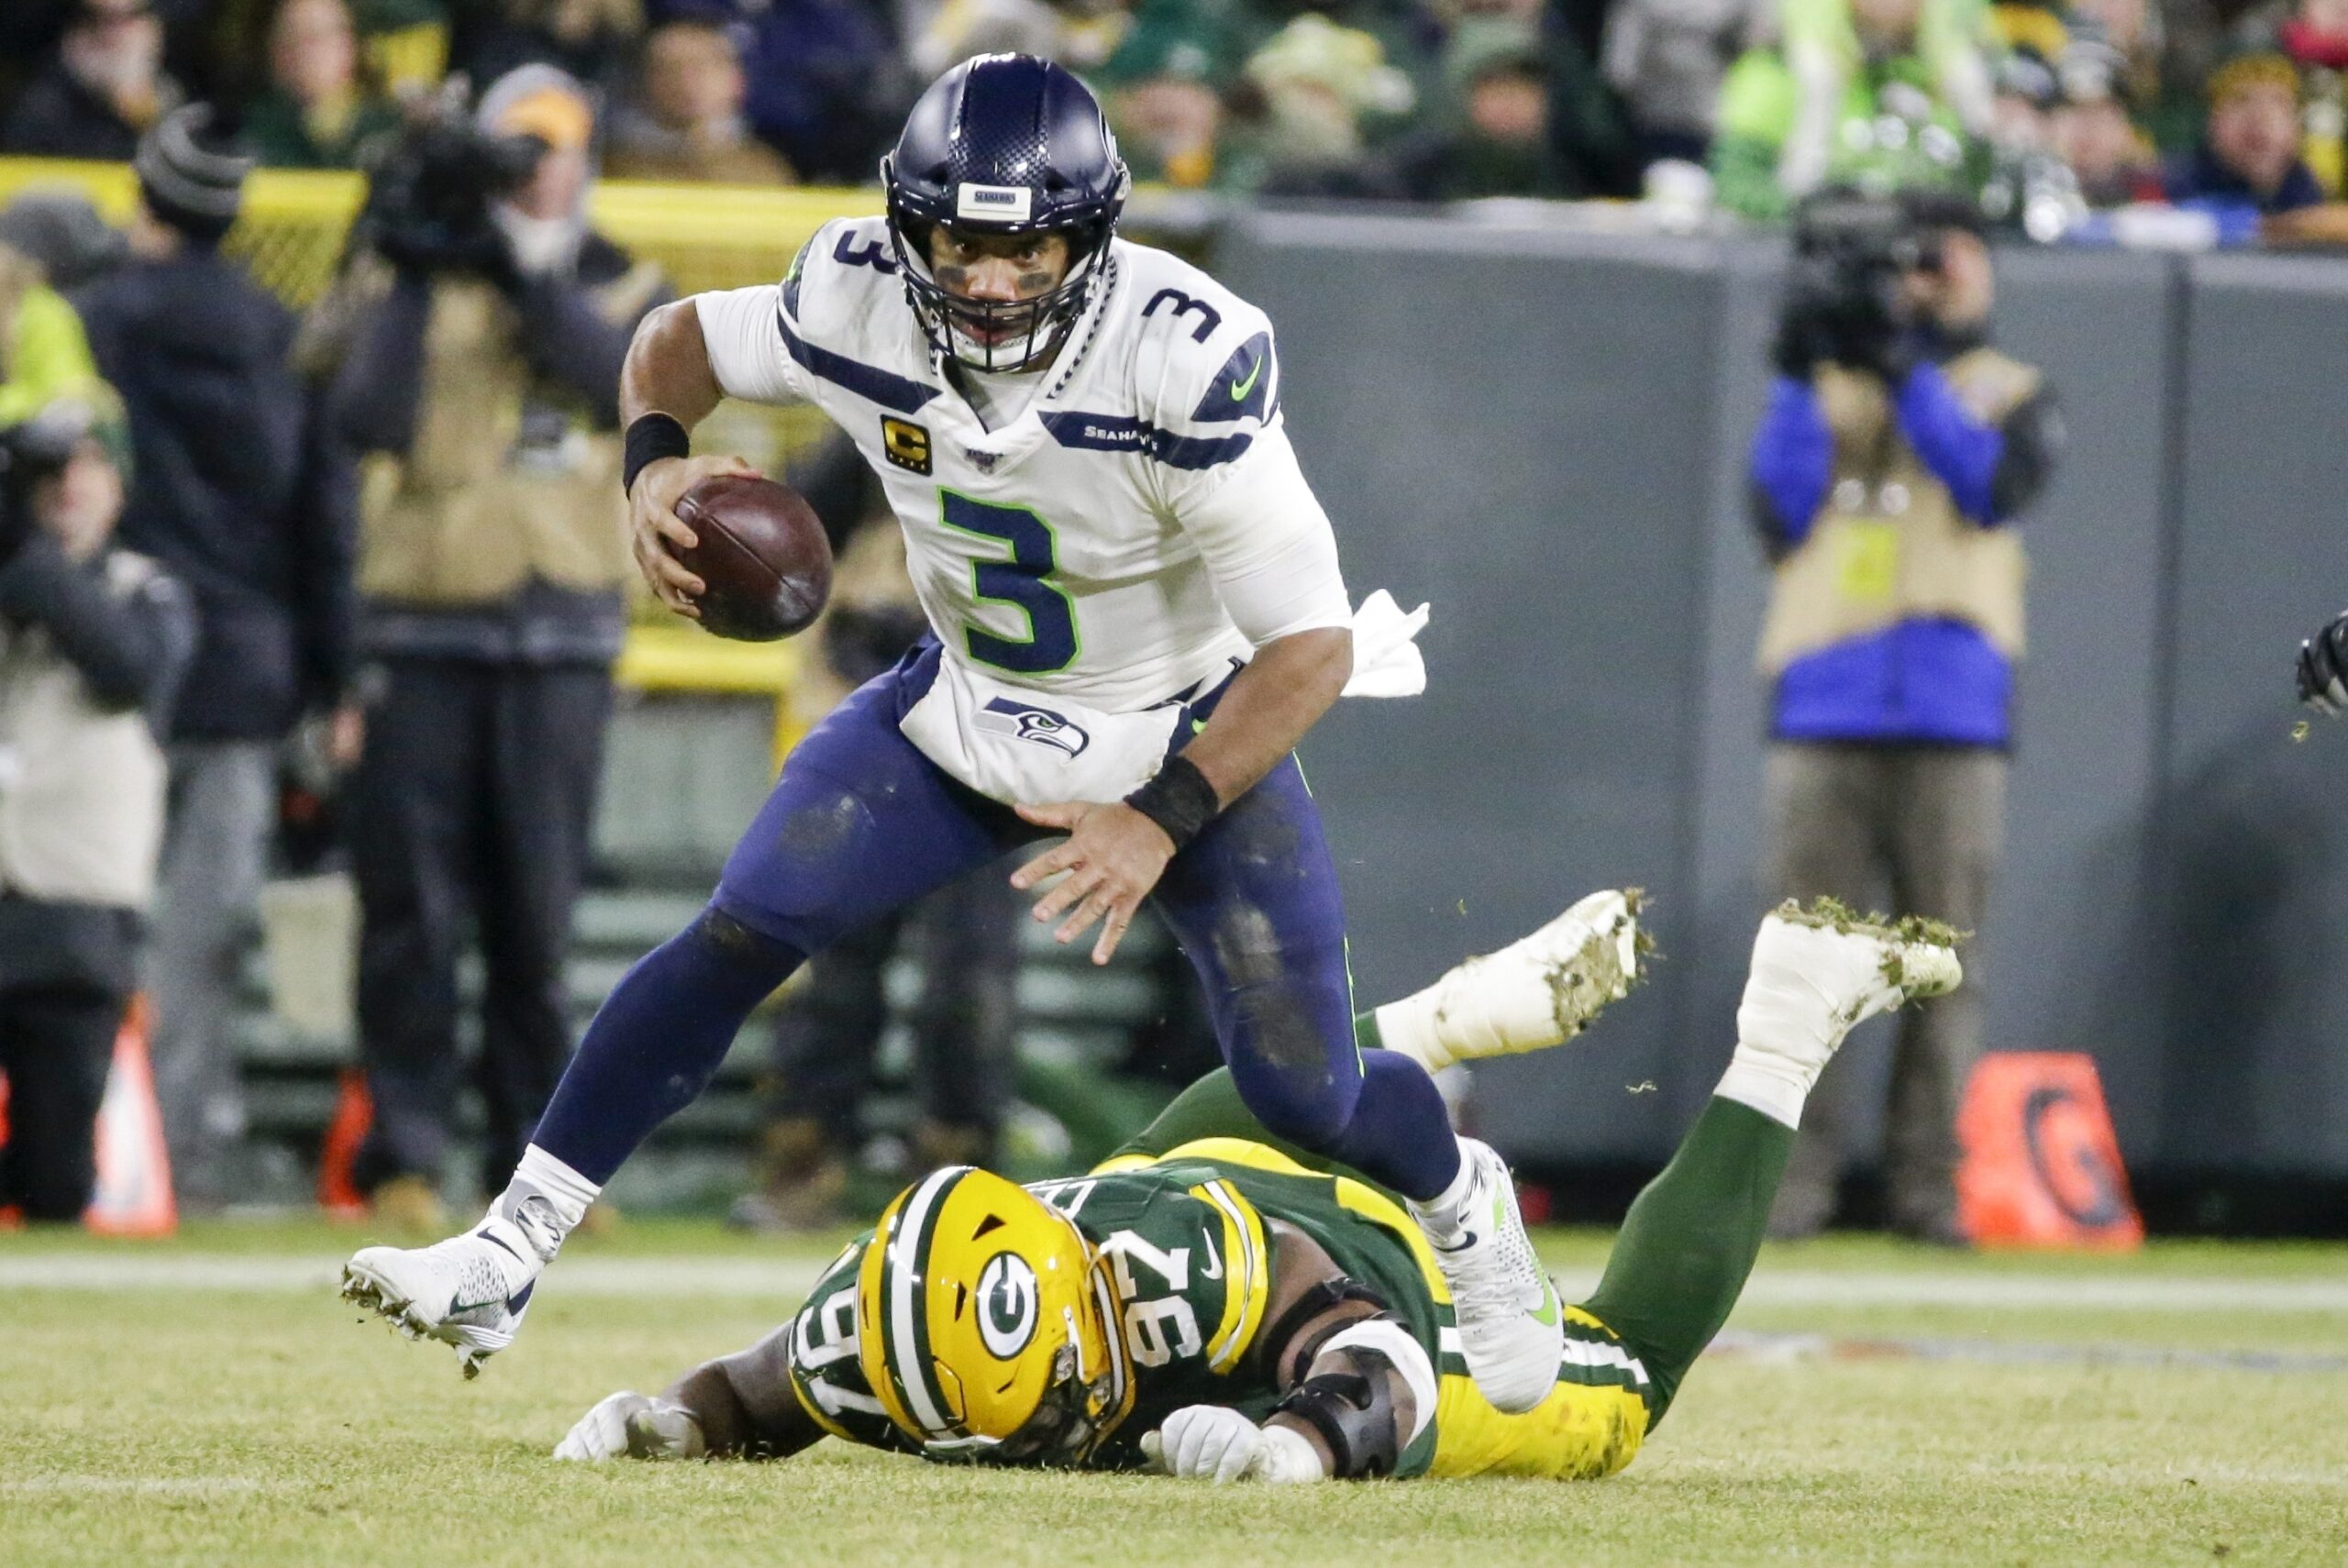 Seattle Seahawks quarterback Russell Wilson makes a play in an NFL playoff game